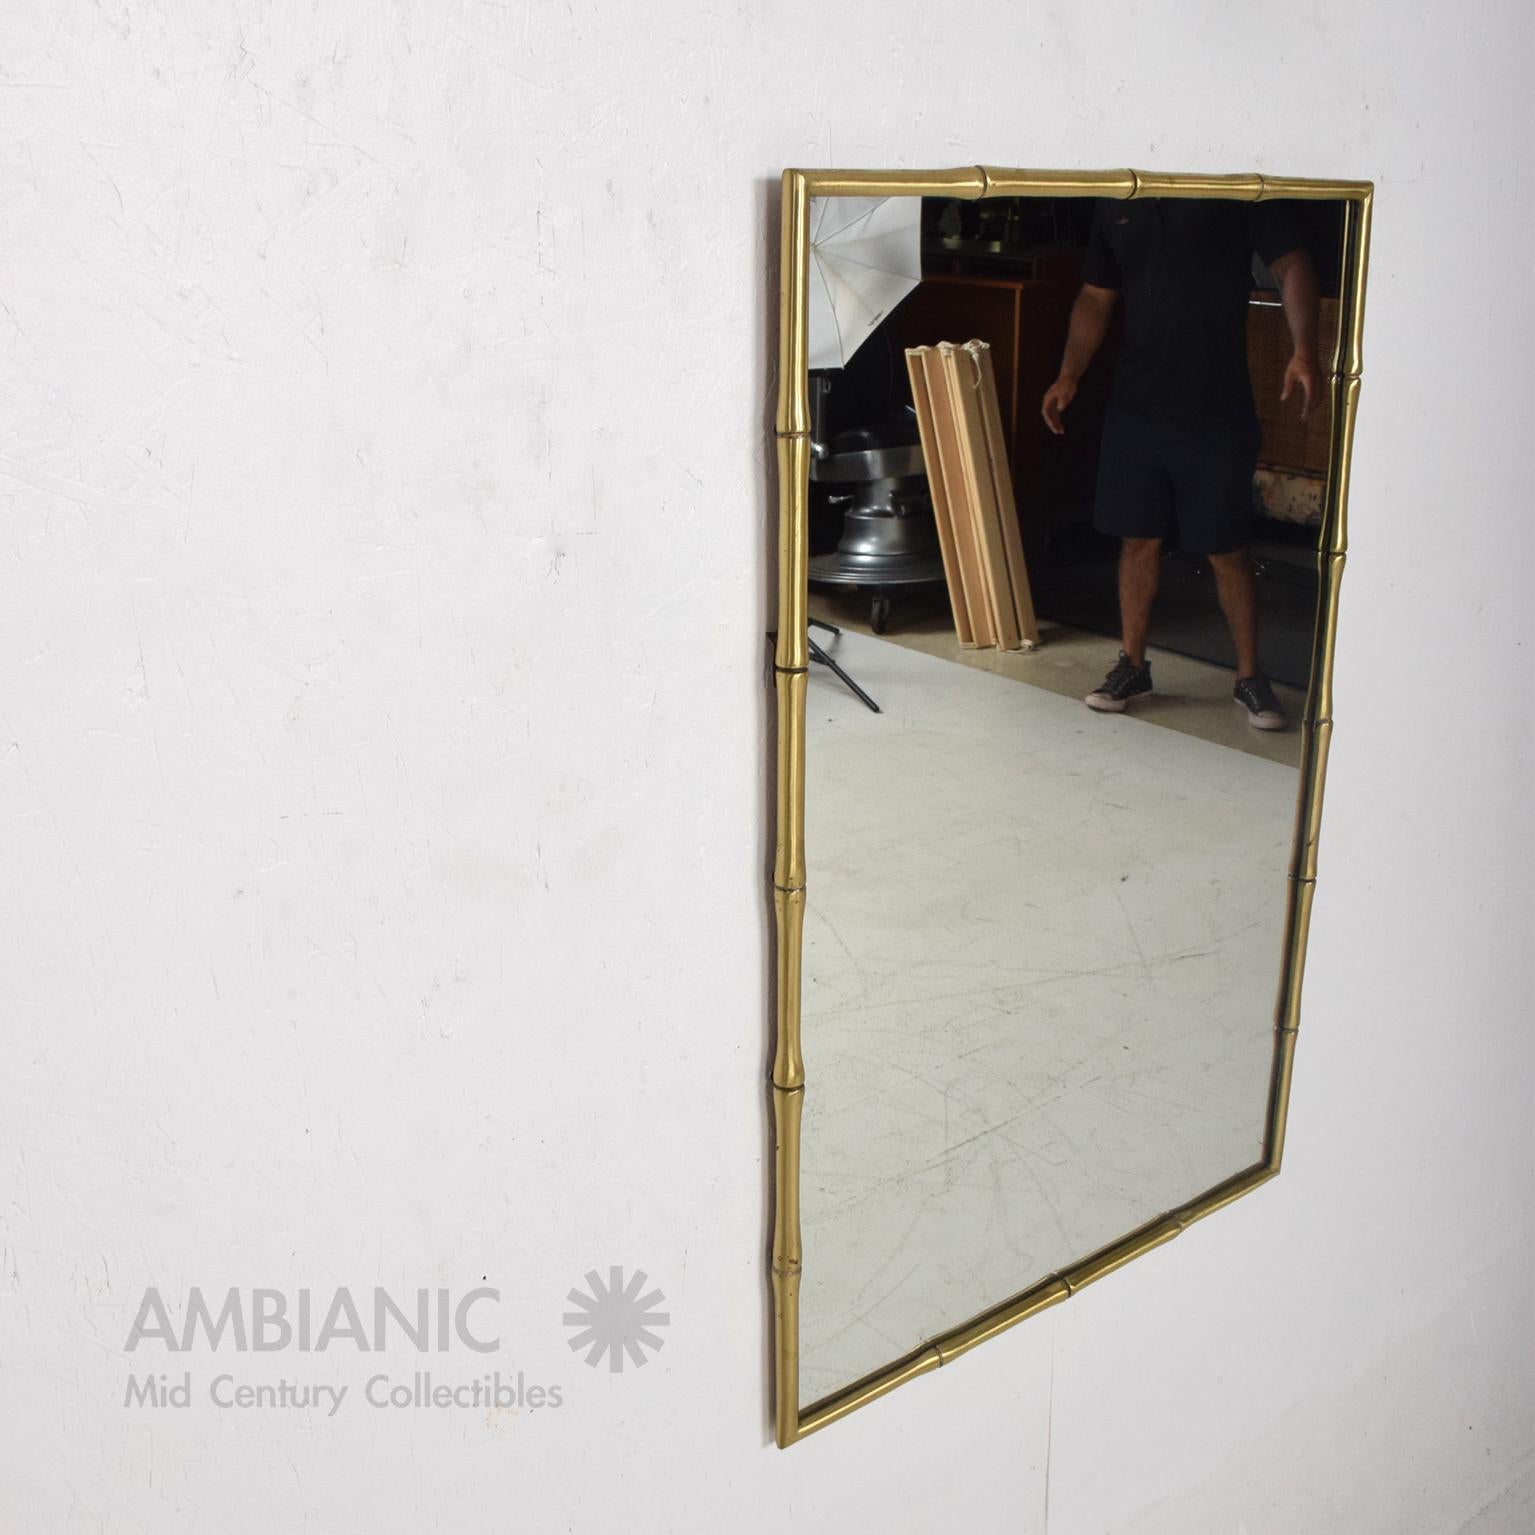 Regency Moderne Wall Mirror in Faux Bamboo Solid Brass Style James Mont 1960s 1